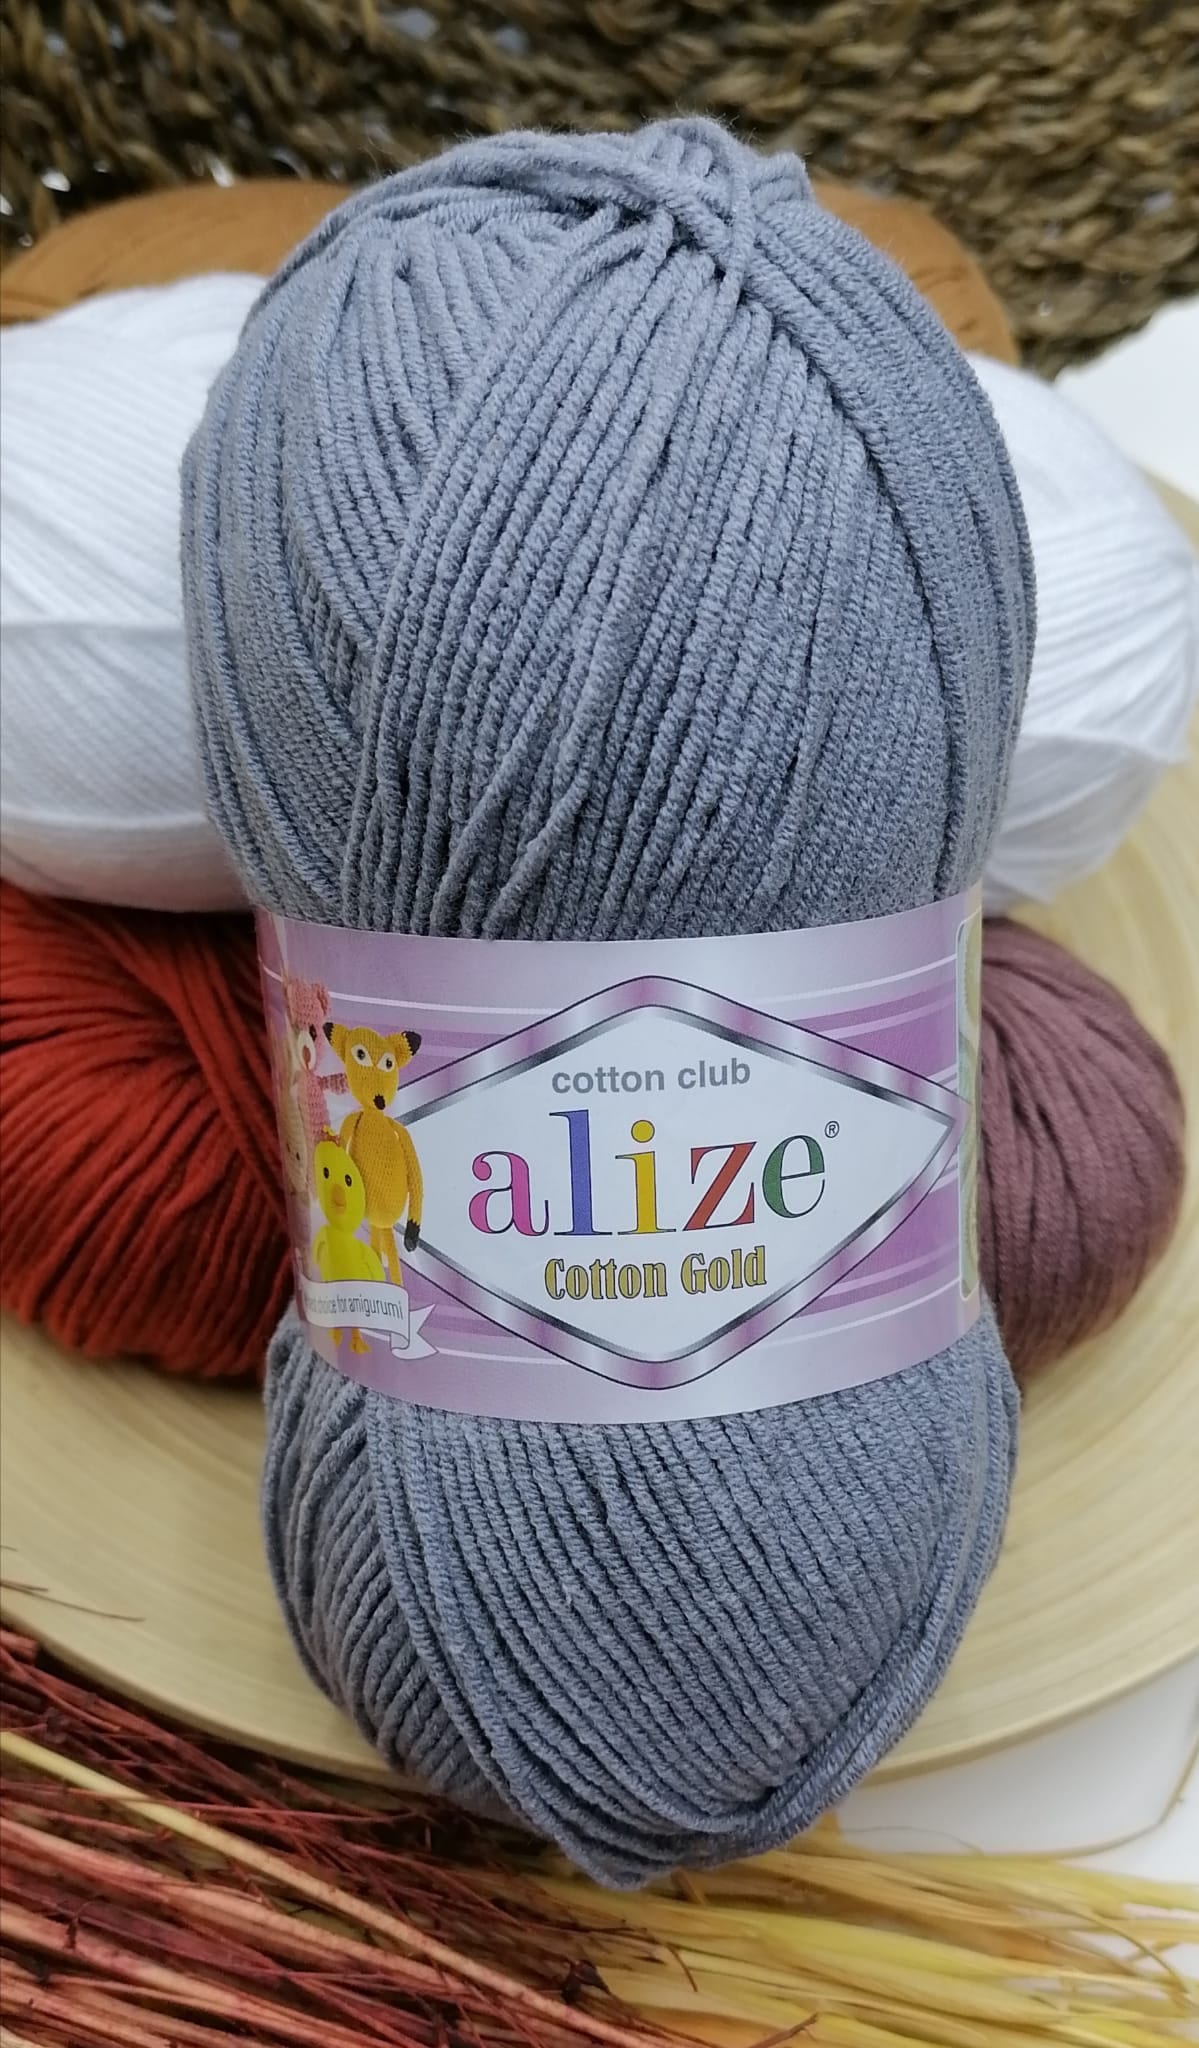 Alize Cotton Gold in Nairobi Central - Arts & Crafts, Yarn Paradise